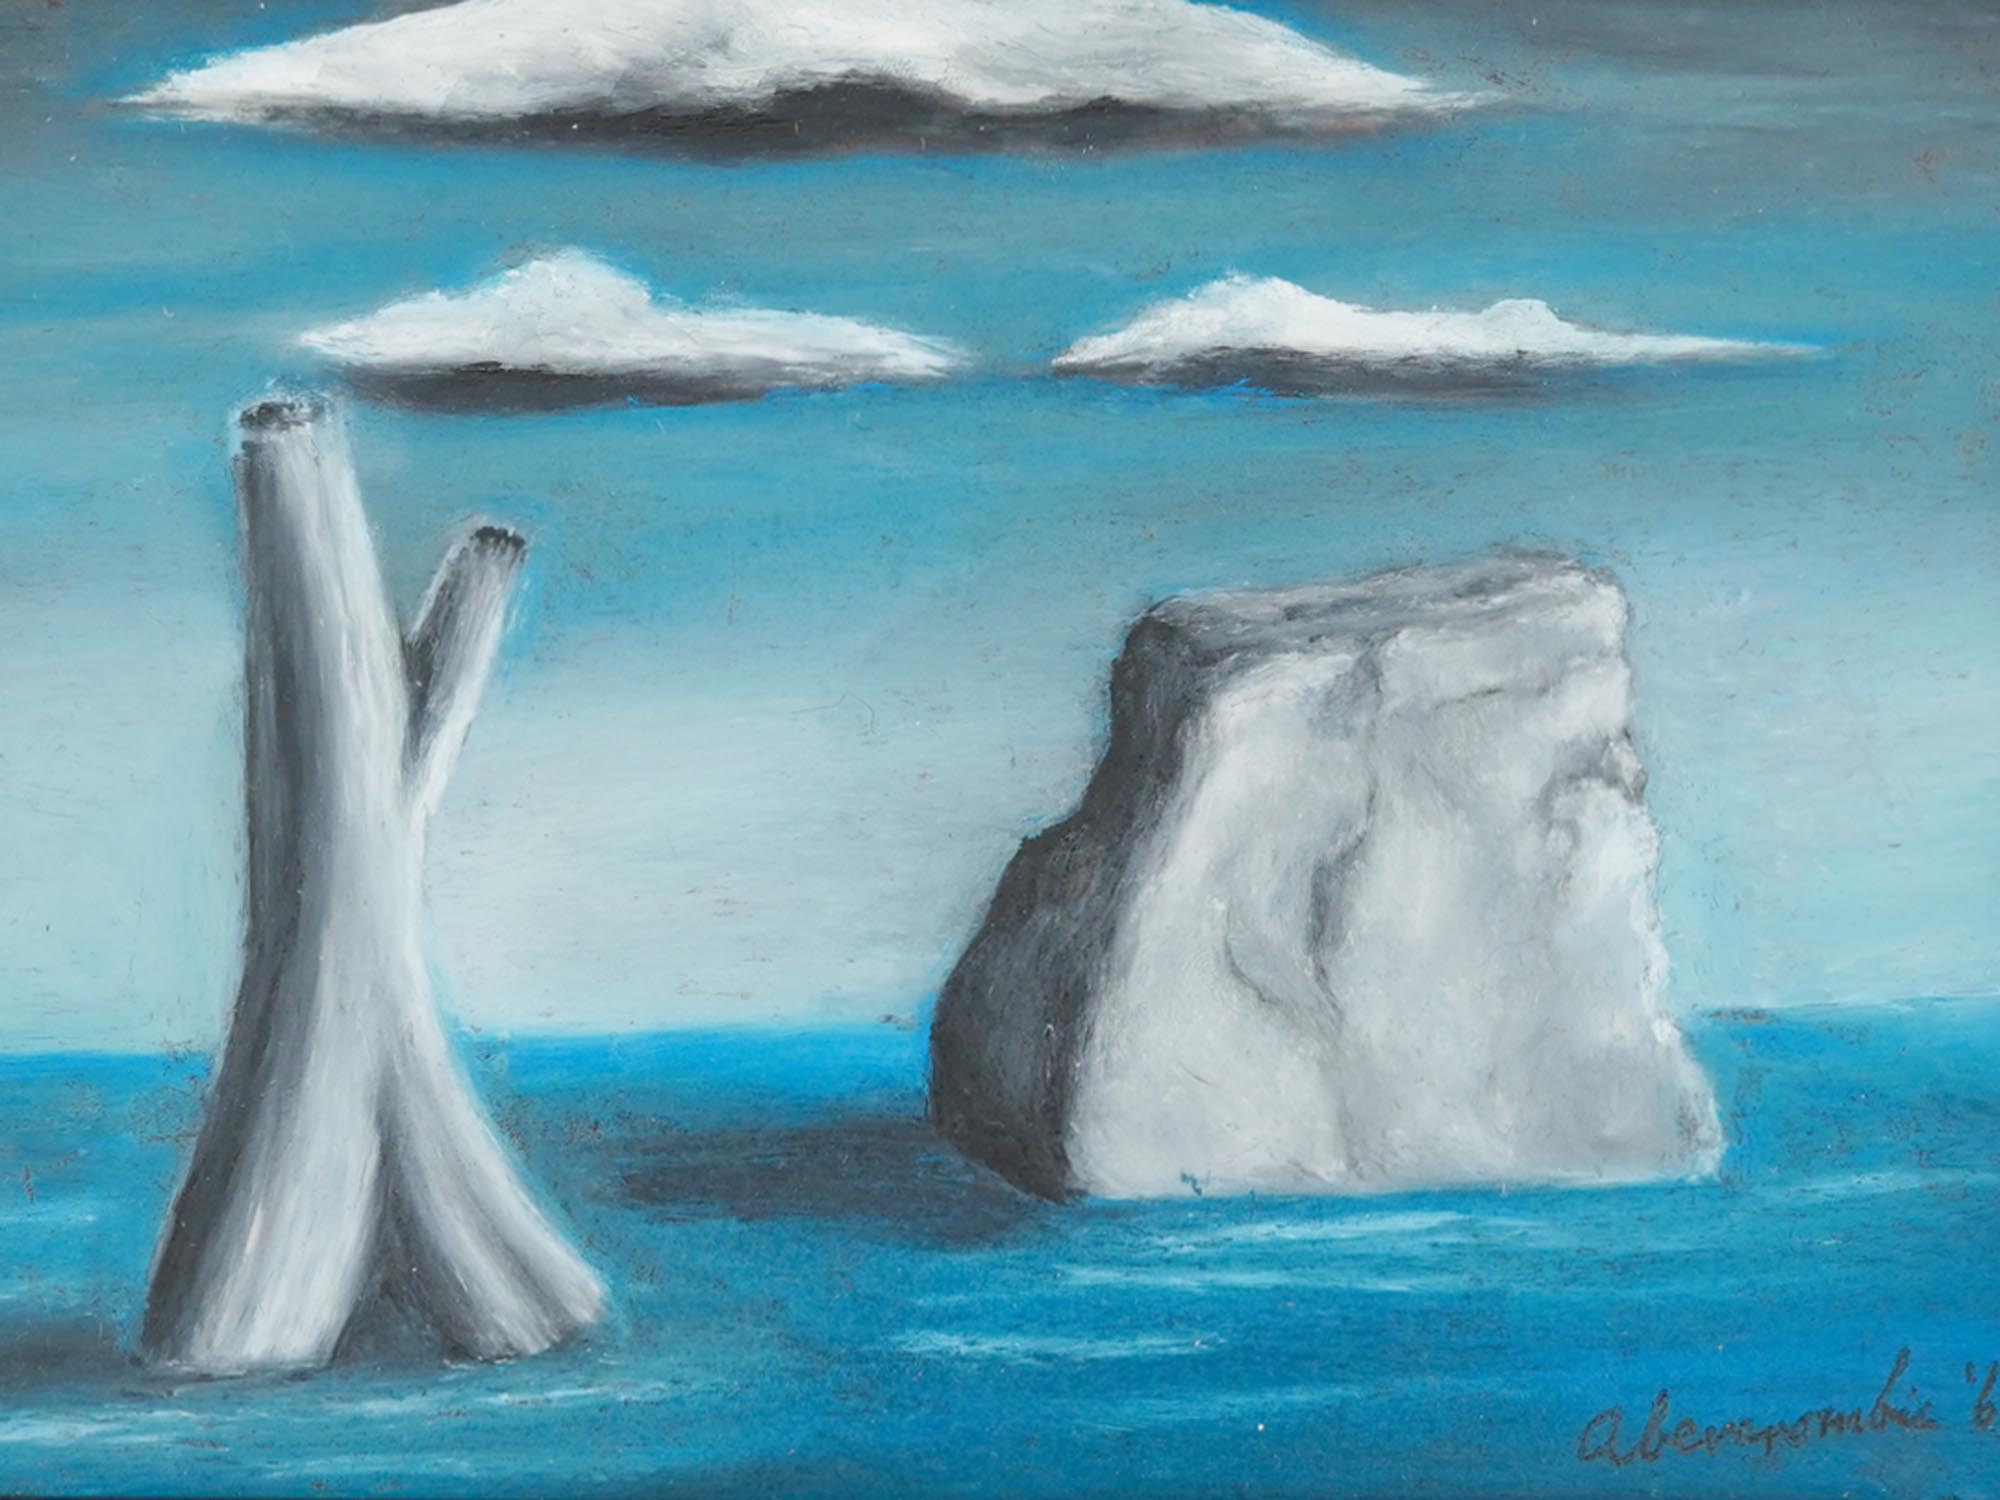 GERTRUDE ABERCROMBIE OIL ON BOARD PAINTING, 1969 PIC-2